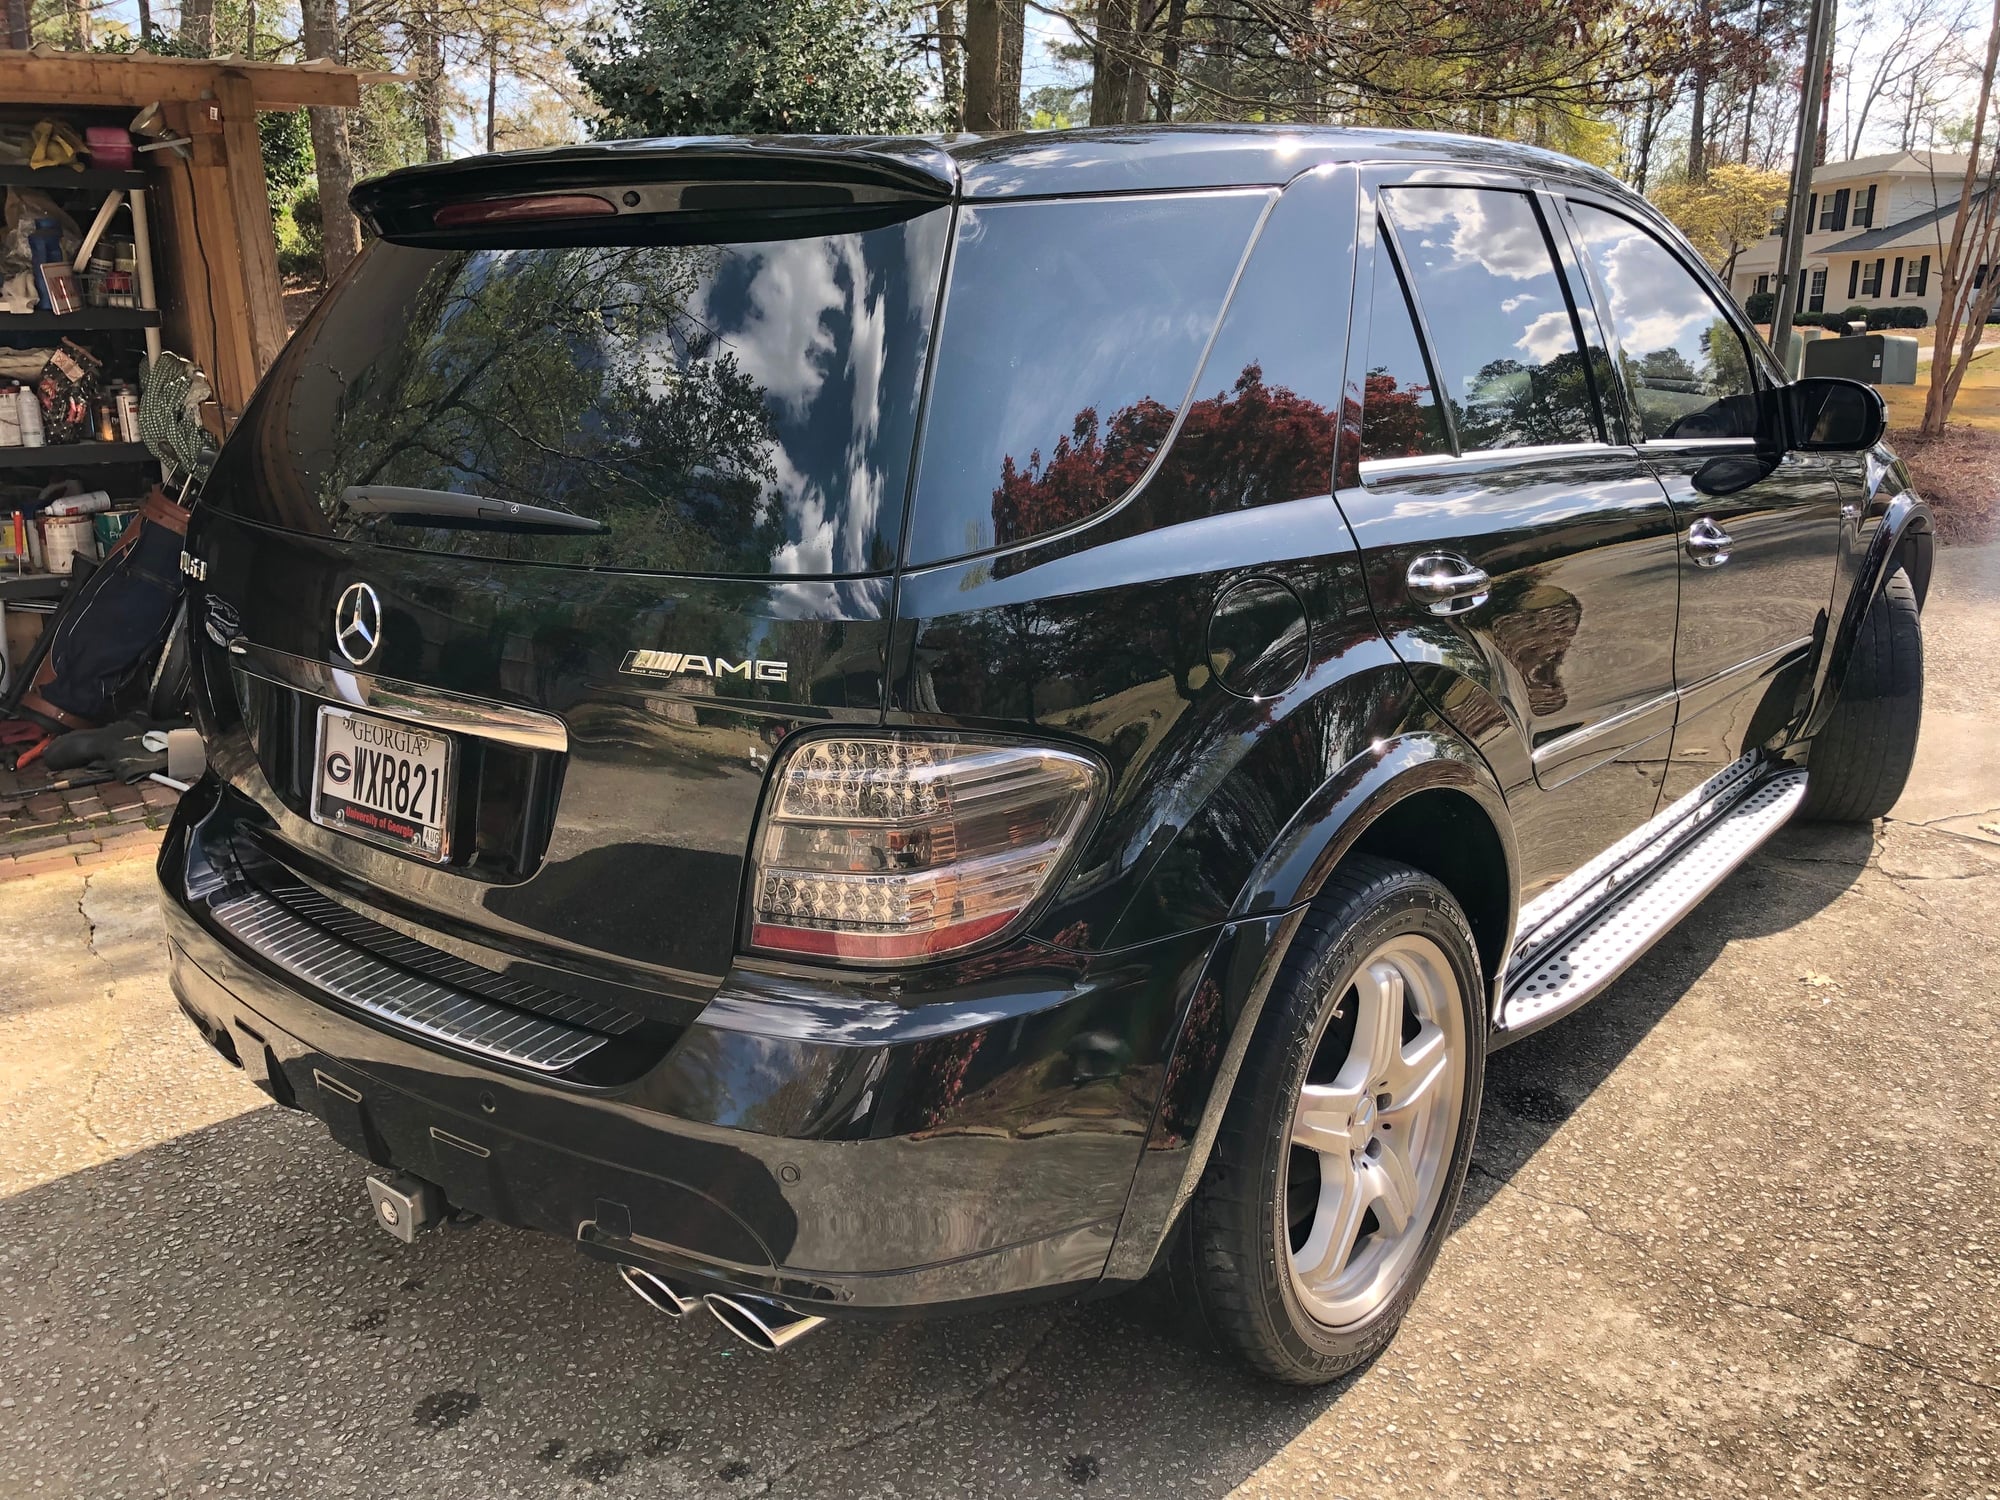 2008 Mercedes-Benz ML63 AMG - 2008 ML63 AMG 82k Very Clean, Stock, Never abused, Adult owned. - Used - VIN 4JGBB77E88a359532 - 82,000 Miles - 8 cyl - AWD - Automatic - SUV - Black - Atlanta, GA 30308, United States